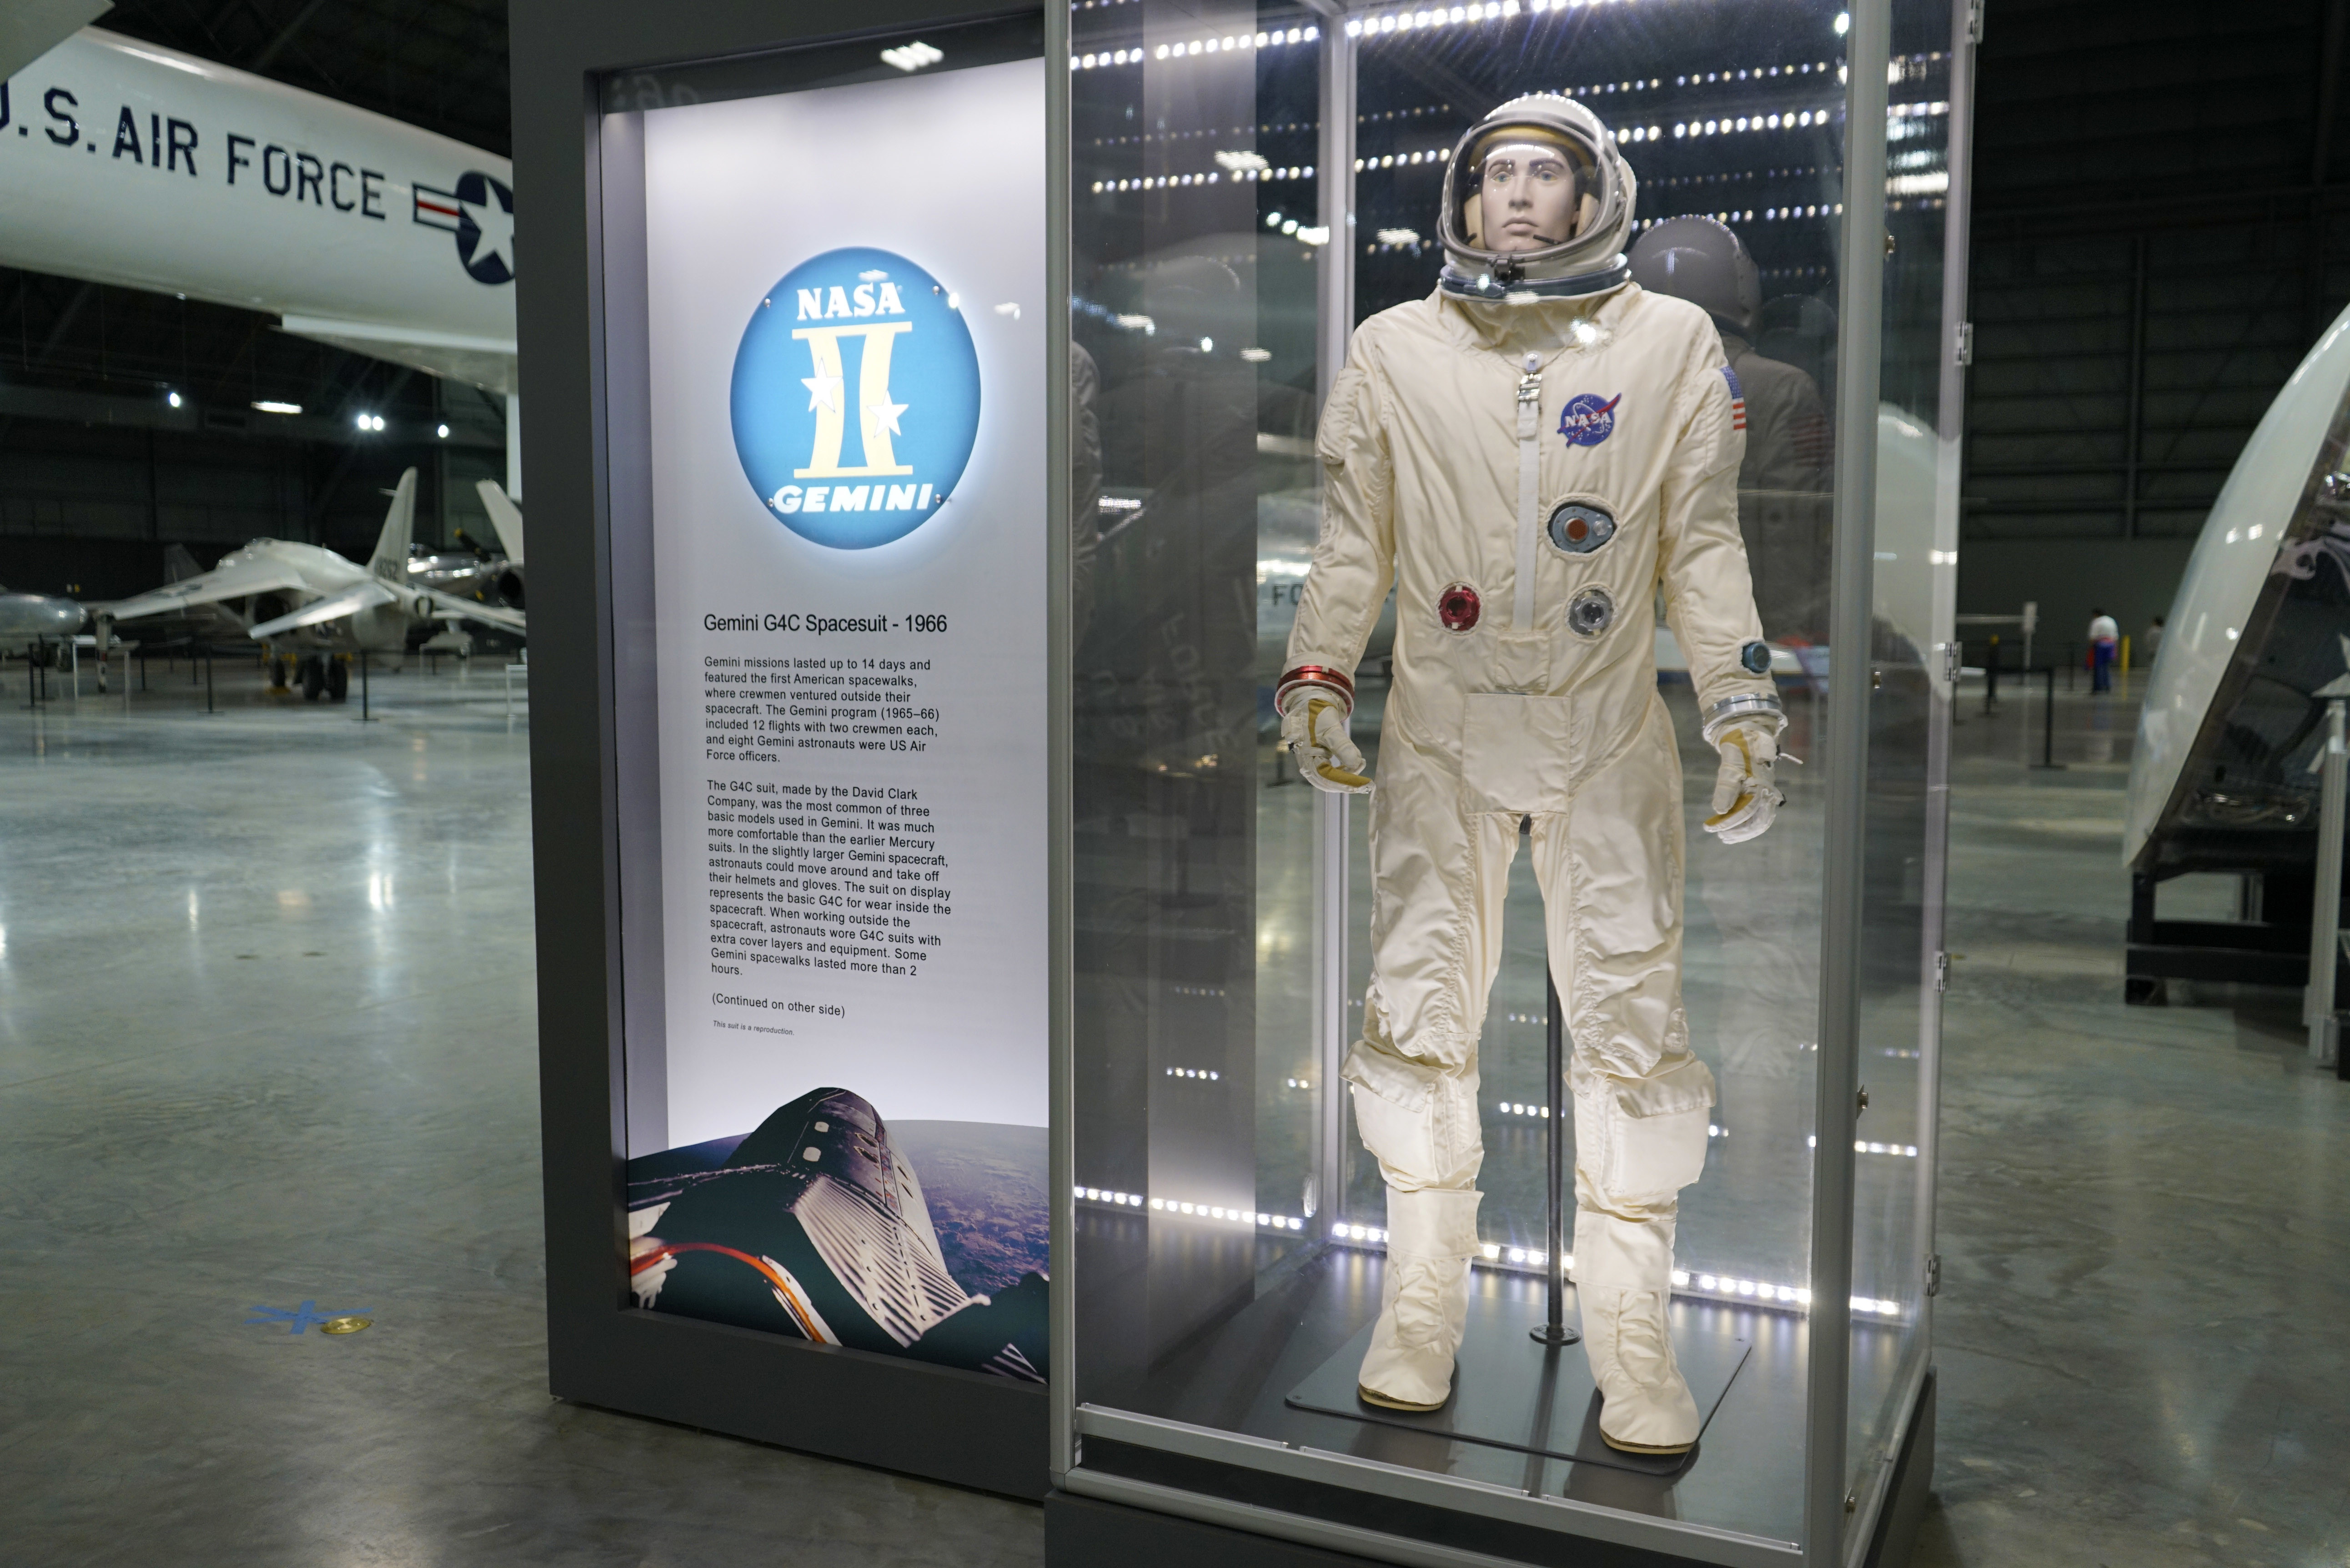 Gemini G4C Space Suit—1966 > National Museum of the United States